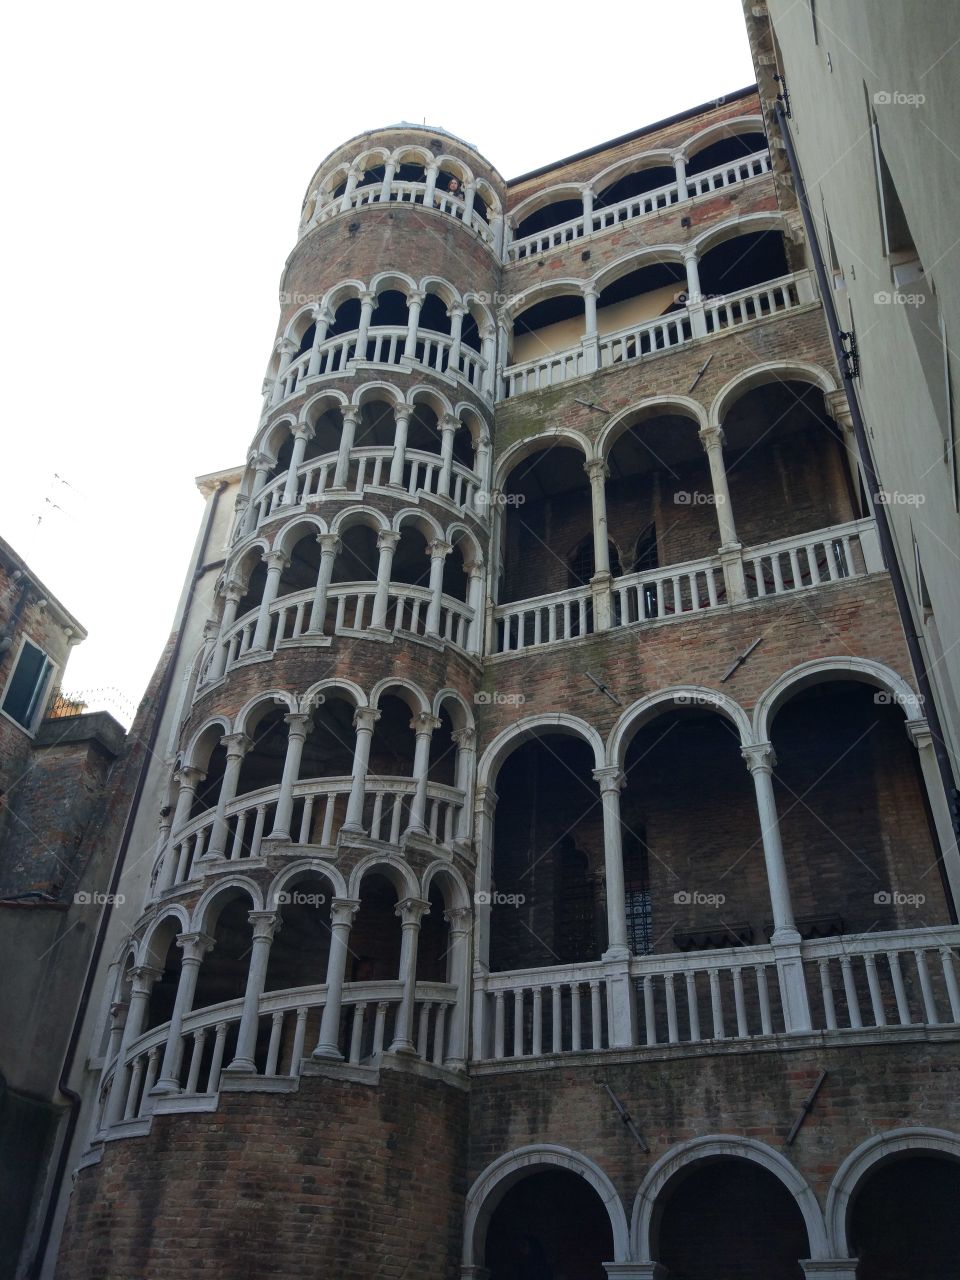 The Palazzo Contarini del Bovolo (also called the Palazzo Contarini Minelli dal Bovolo) is a small palazzo in Venice, Italy, best known for its external multi-arch spiral staircase known as the Scala Contarini del Bovolo (literally, "of the snail")